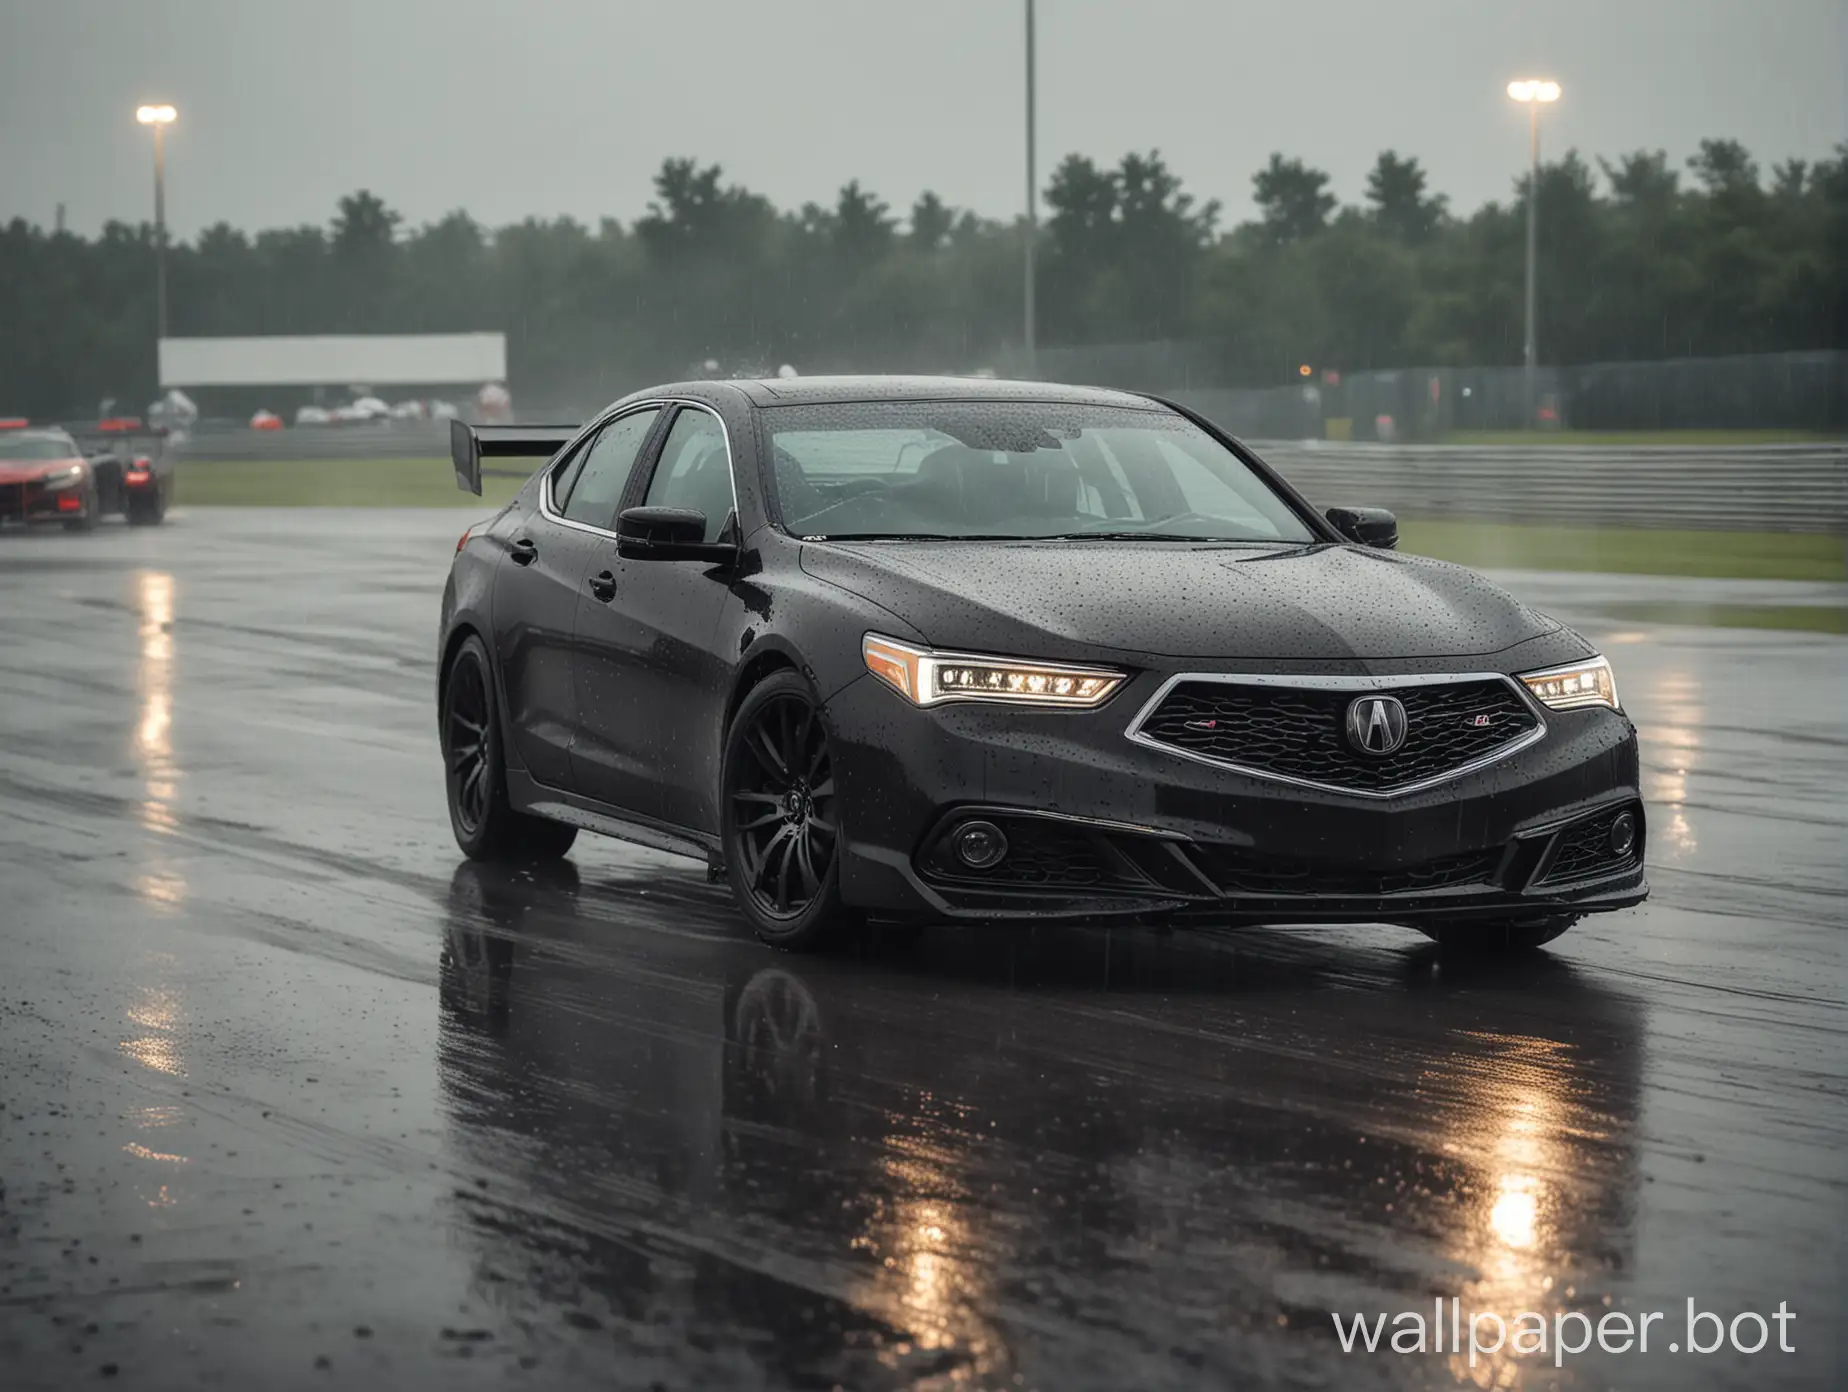 acura tlx on a race track rainy day in 4k resolution